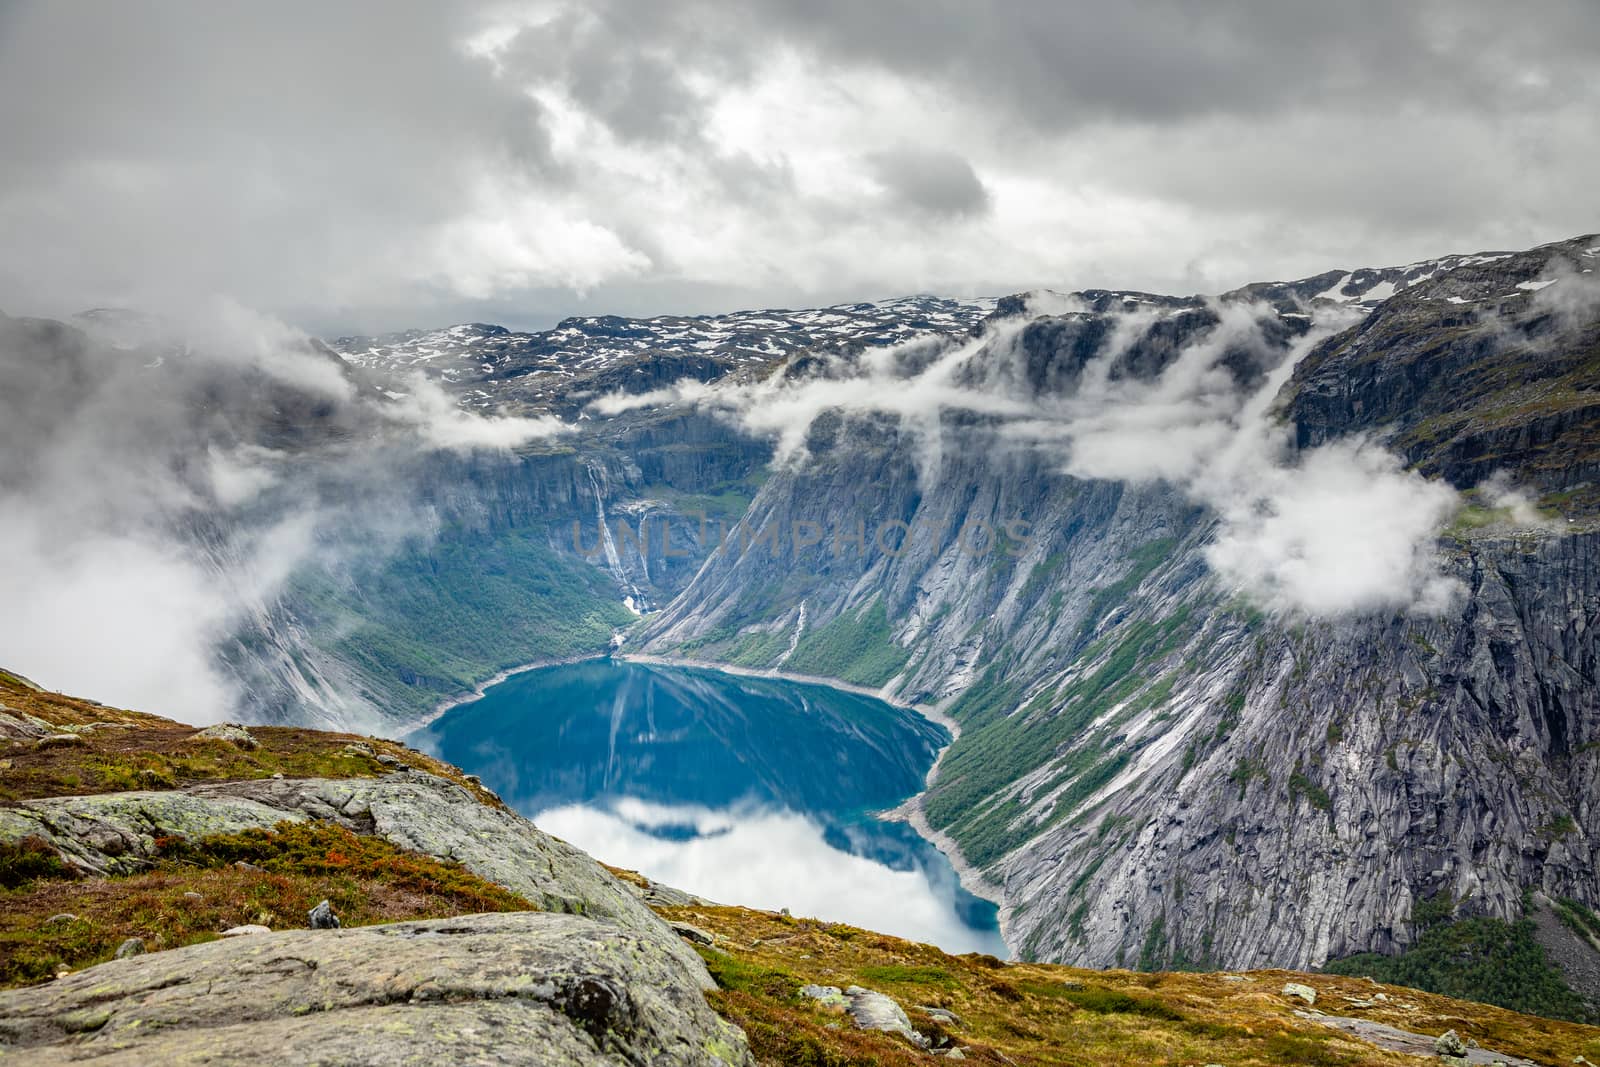 Blue lake surrounded by steep cliffs hiding in clouds, Odda, Hordaland county, Norway